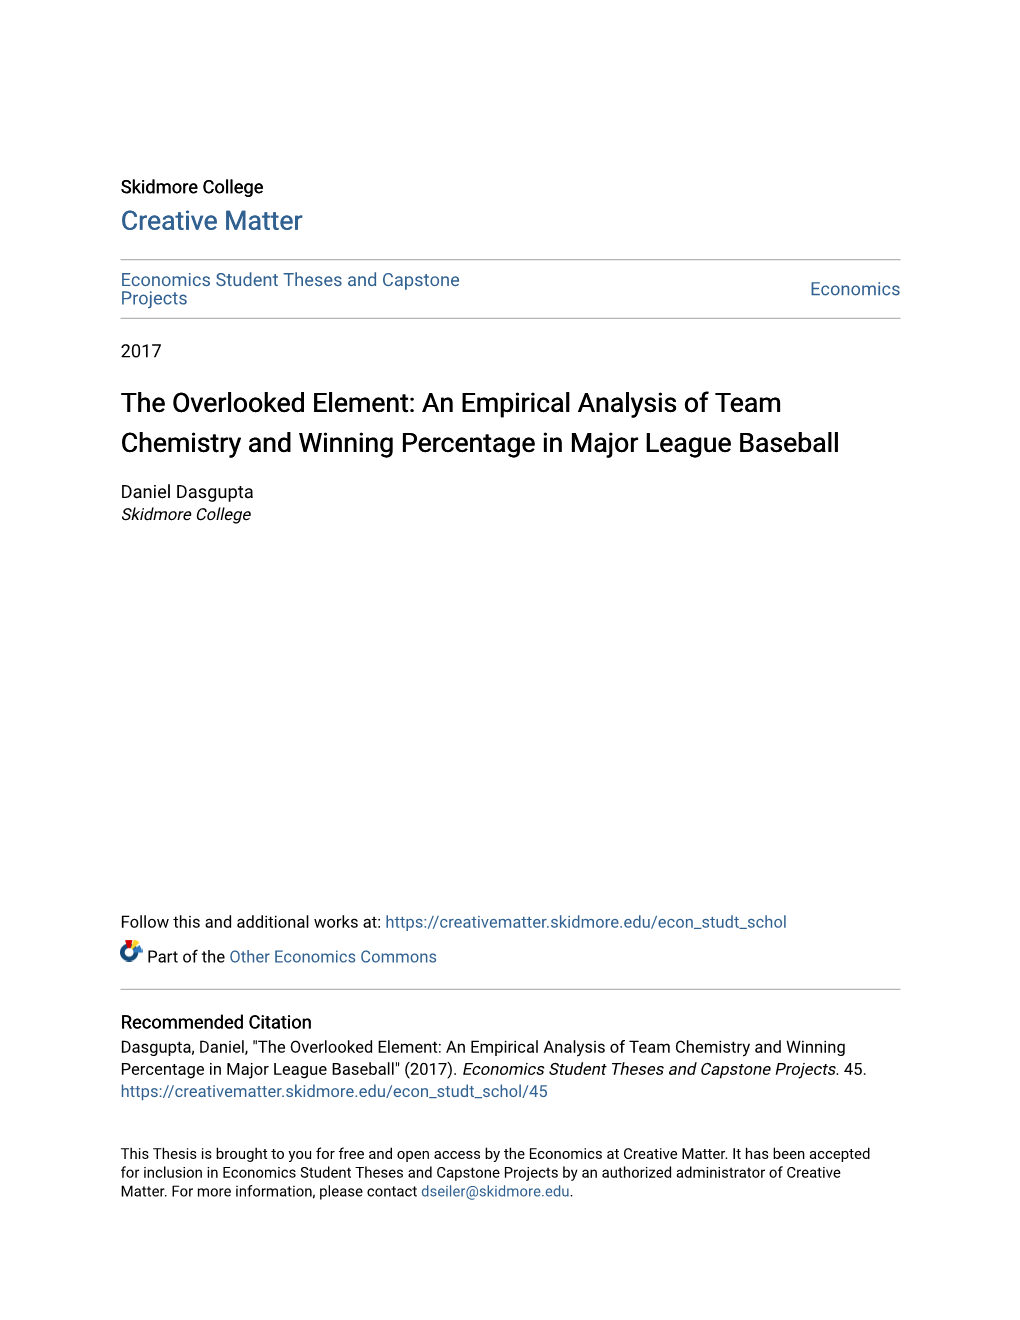 An Empirical Analysis of Team Chemistry and Winning Percentage in Major League Baseball